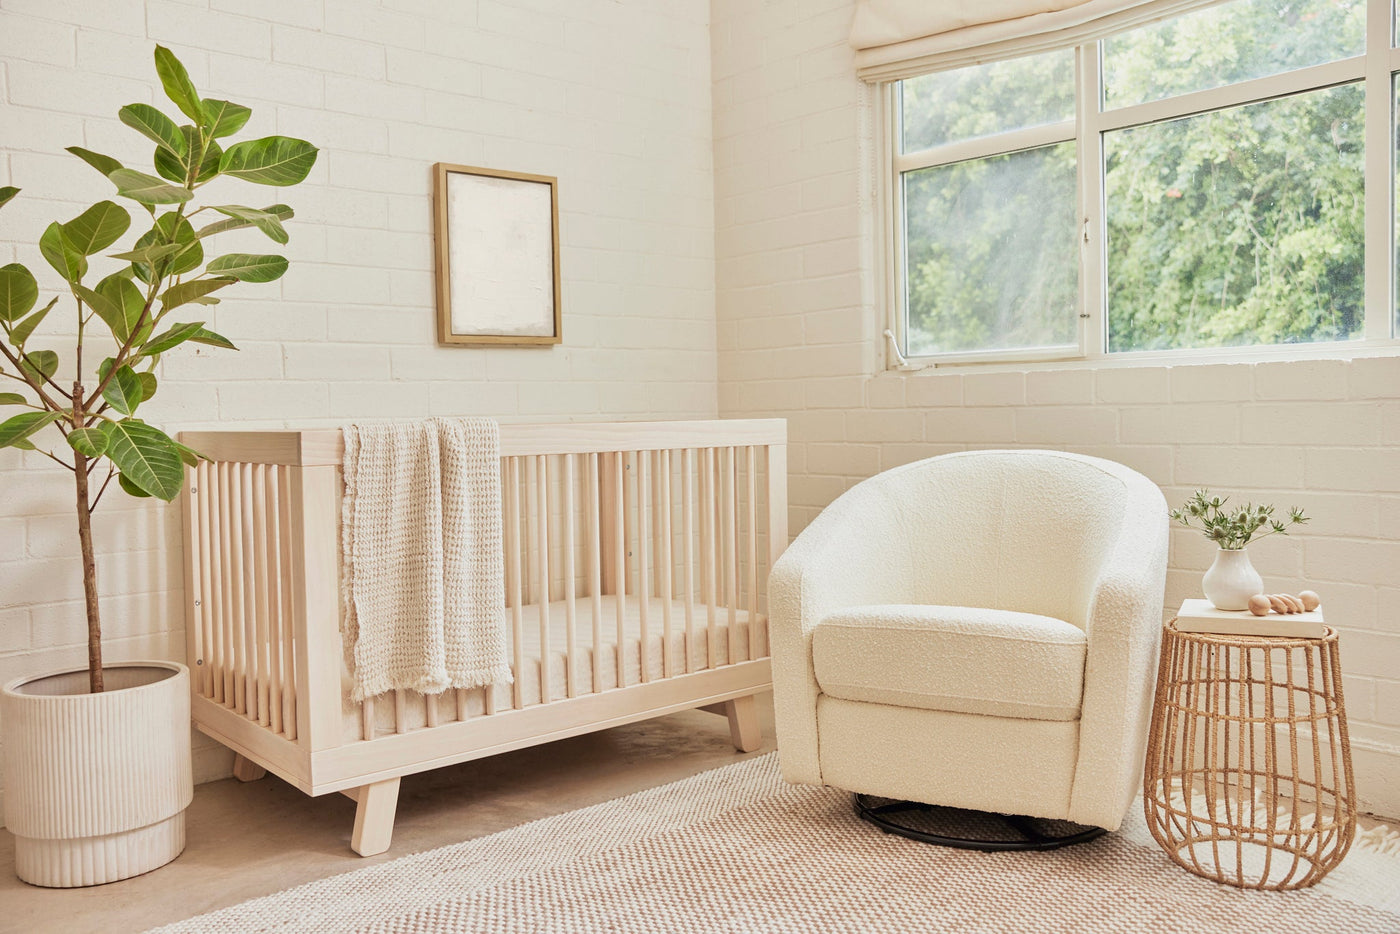 Baby nursery with Babyletto cot furniture